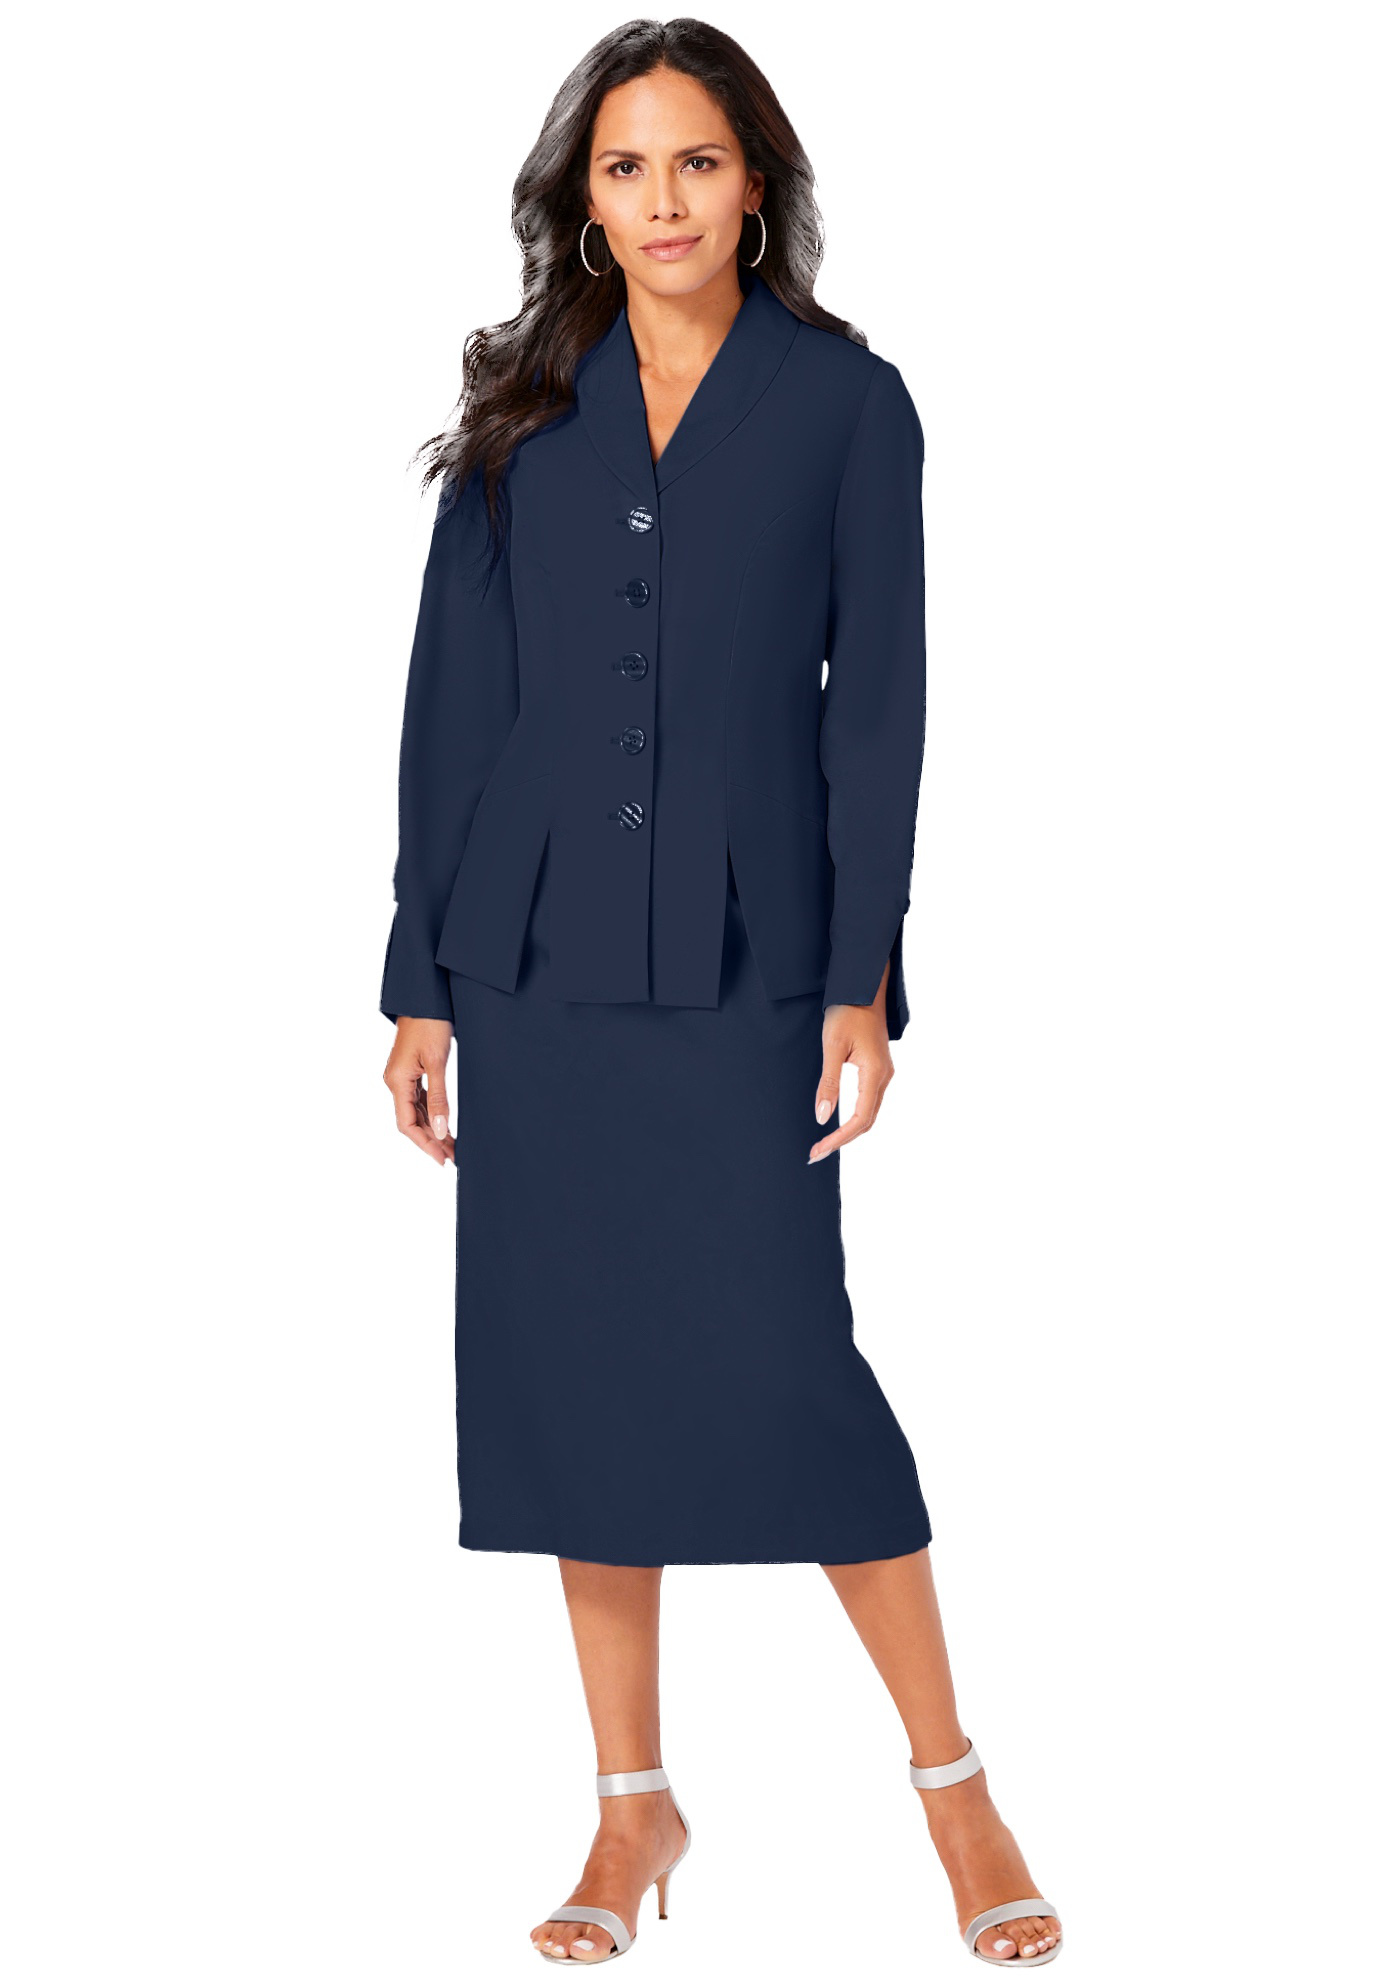 Roaman's Women's Plus Size Two-Piece Skirt Suit With Shawl-Collar Jacket Skirt Suit - image 1 of 5